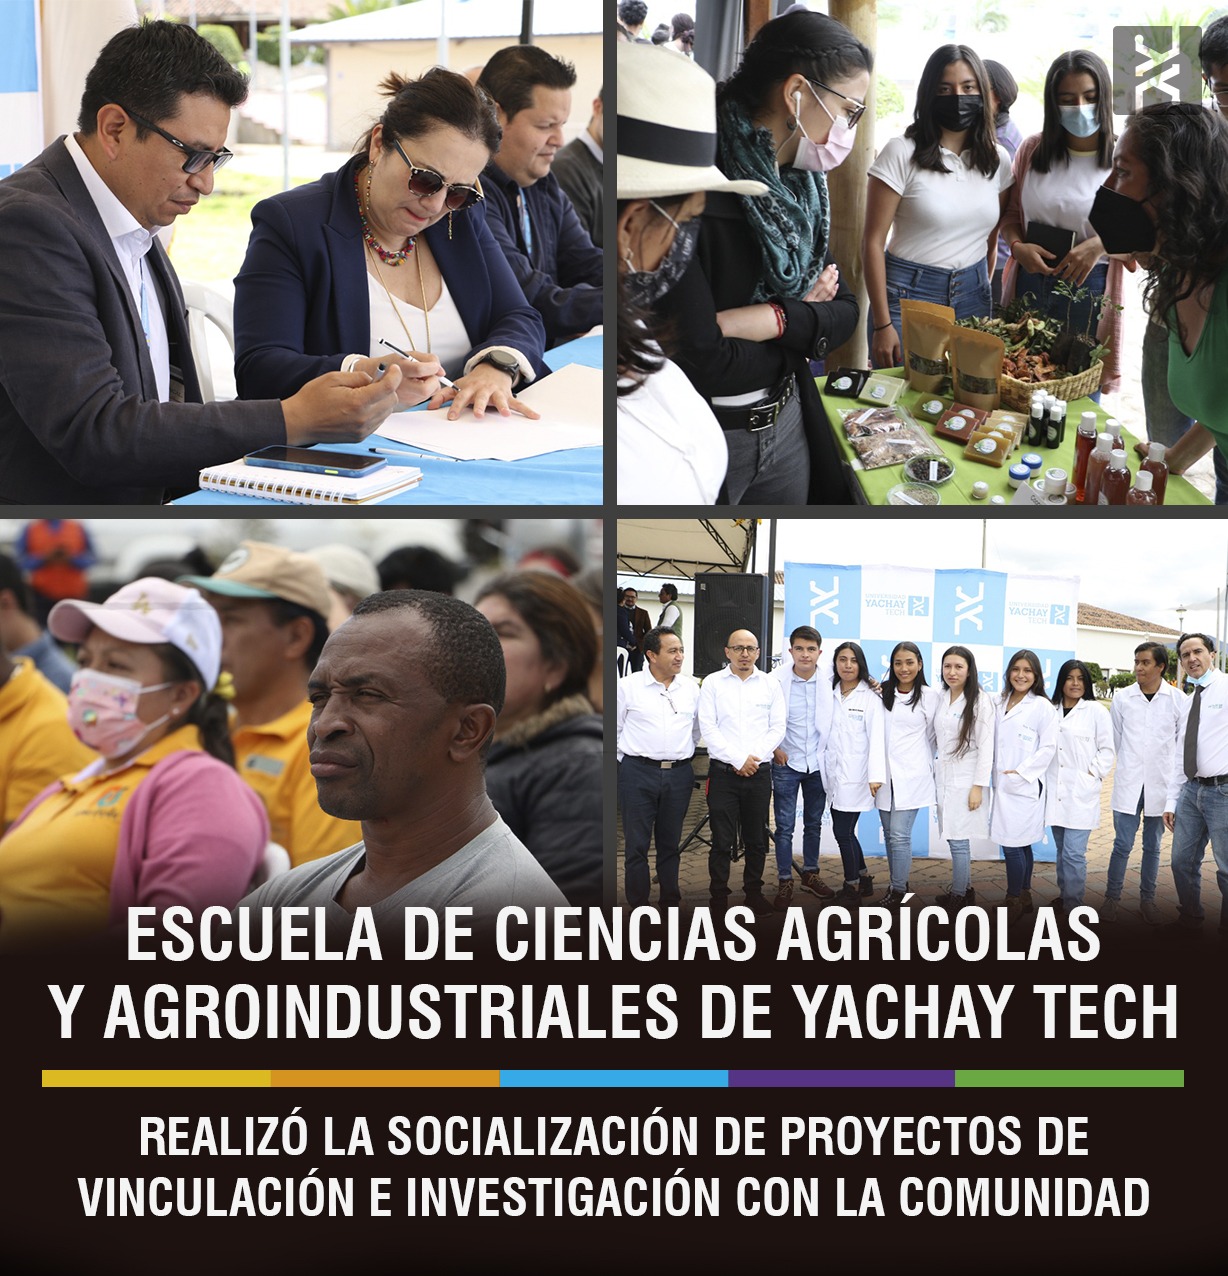 SCHOOL OF AGRICULTURAL AND AGROINDUSTRIAL RESEARCH PRESENTED RESEARCH AND COMMUNITY ENGAGEMENT PROJECTS